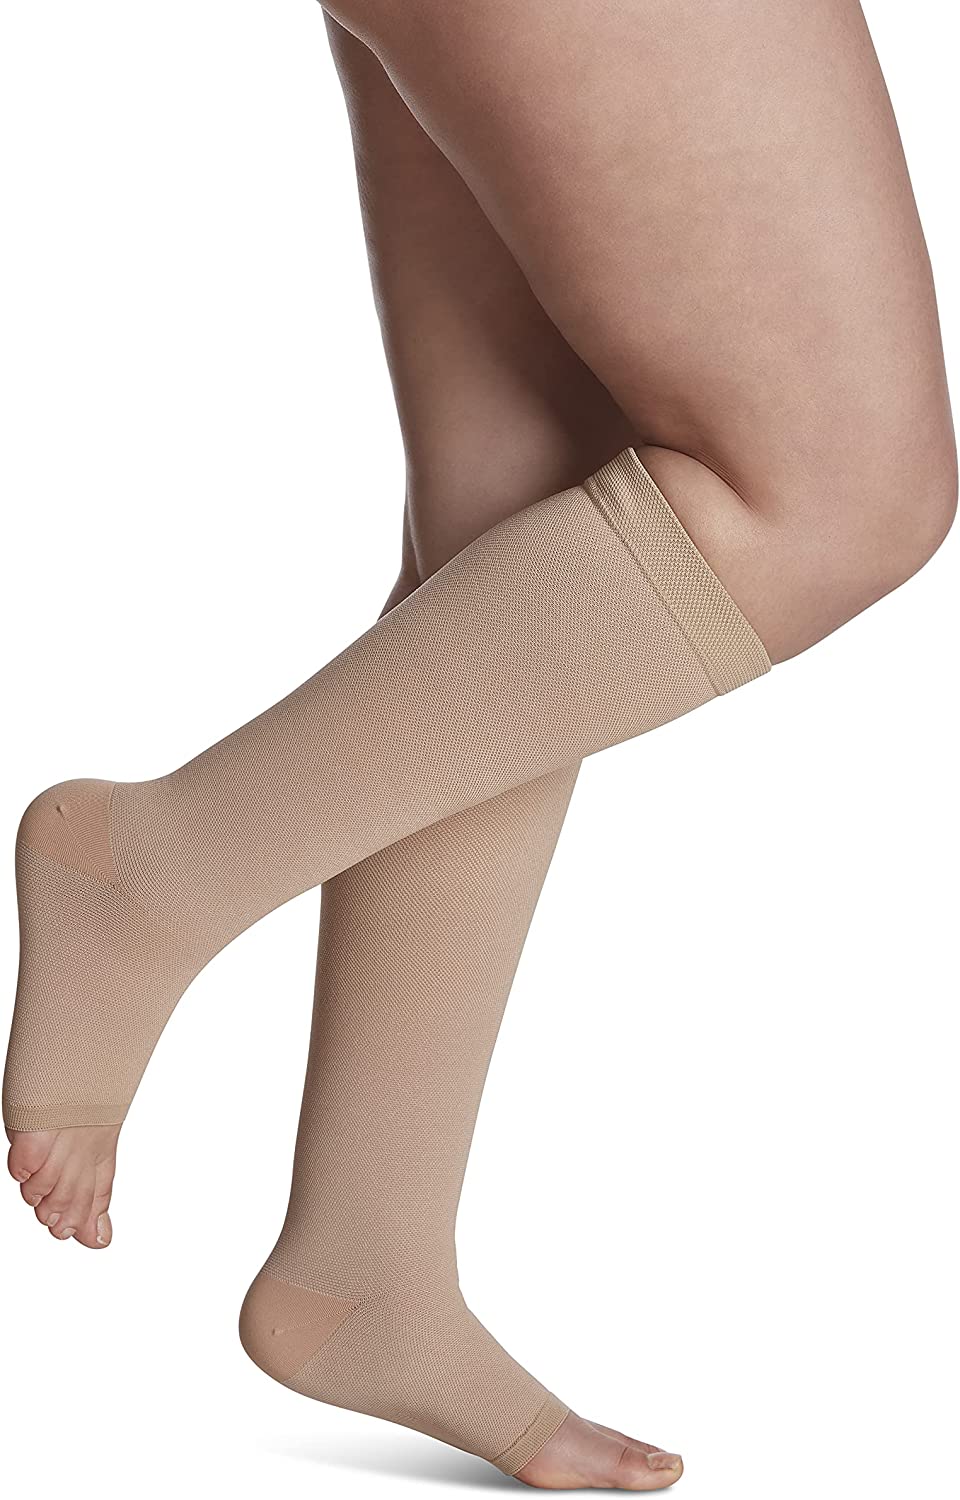 Compression Stocking Pressure To Support Tights